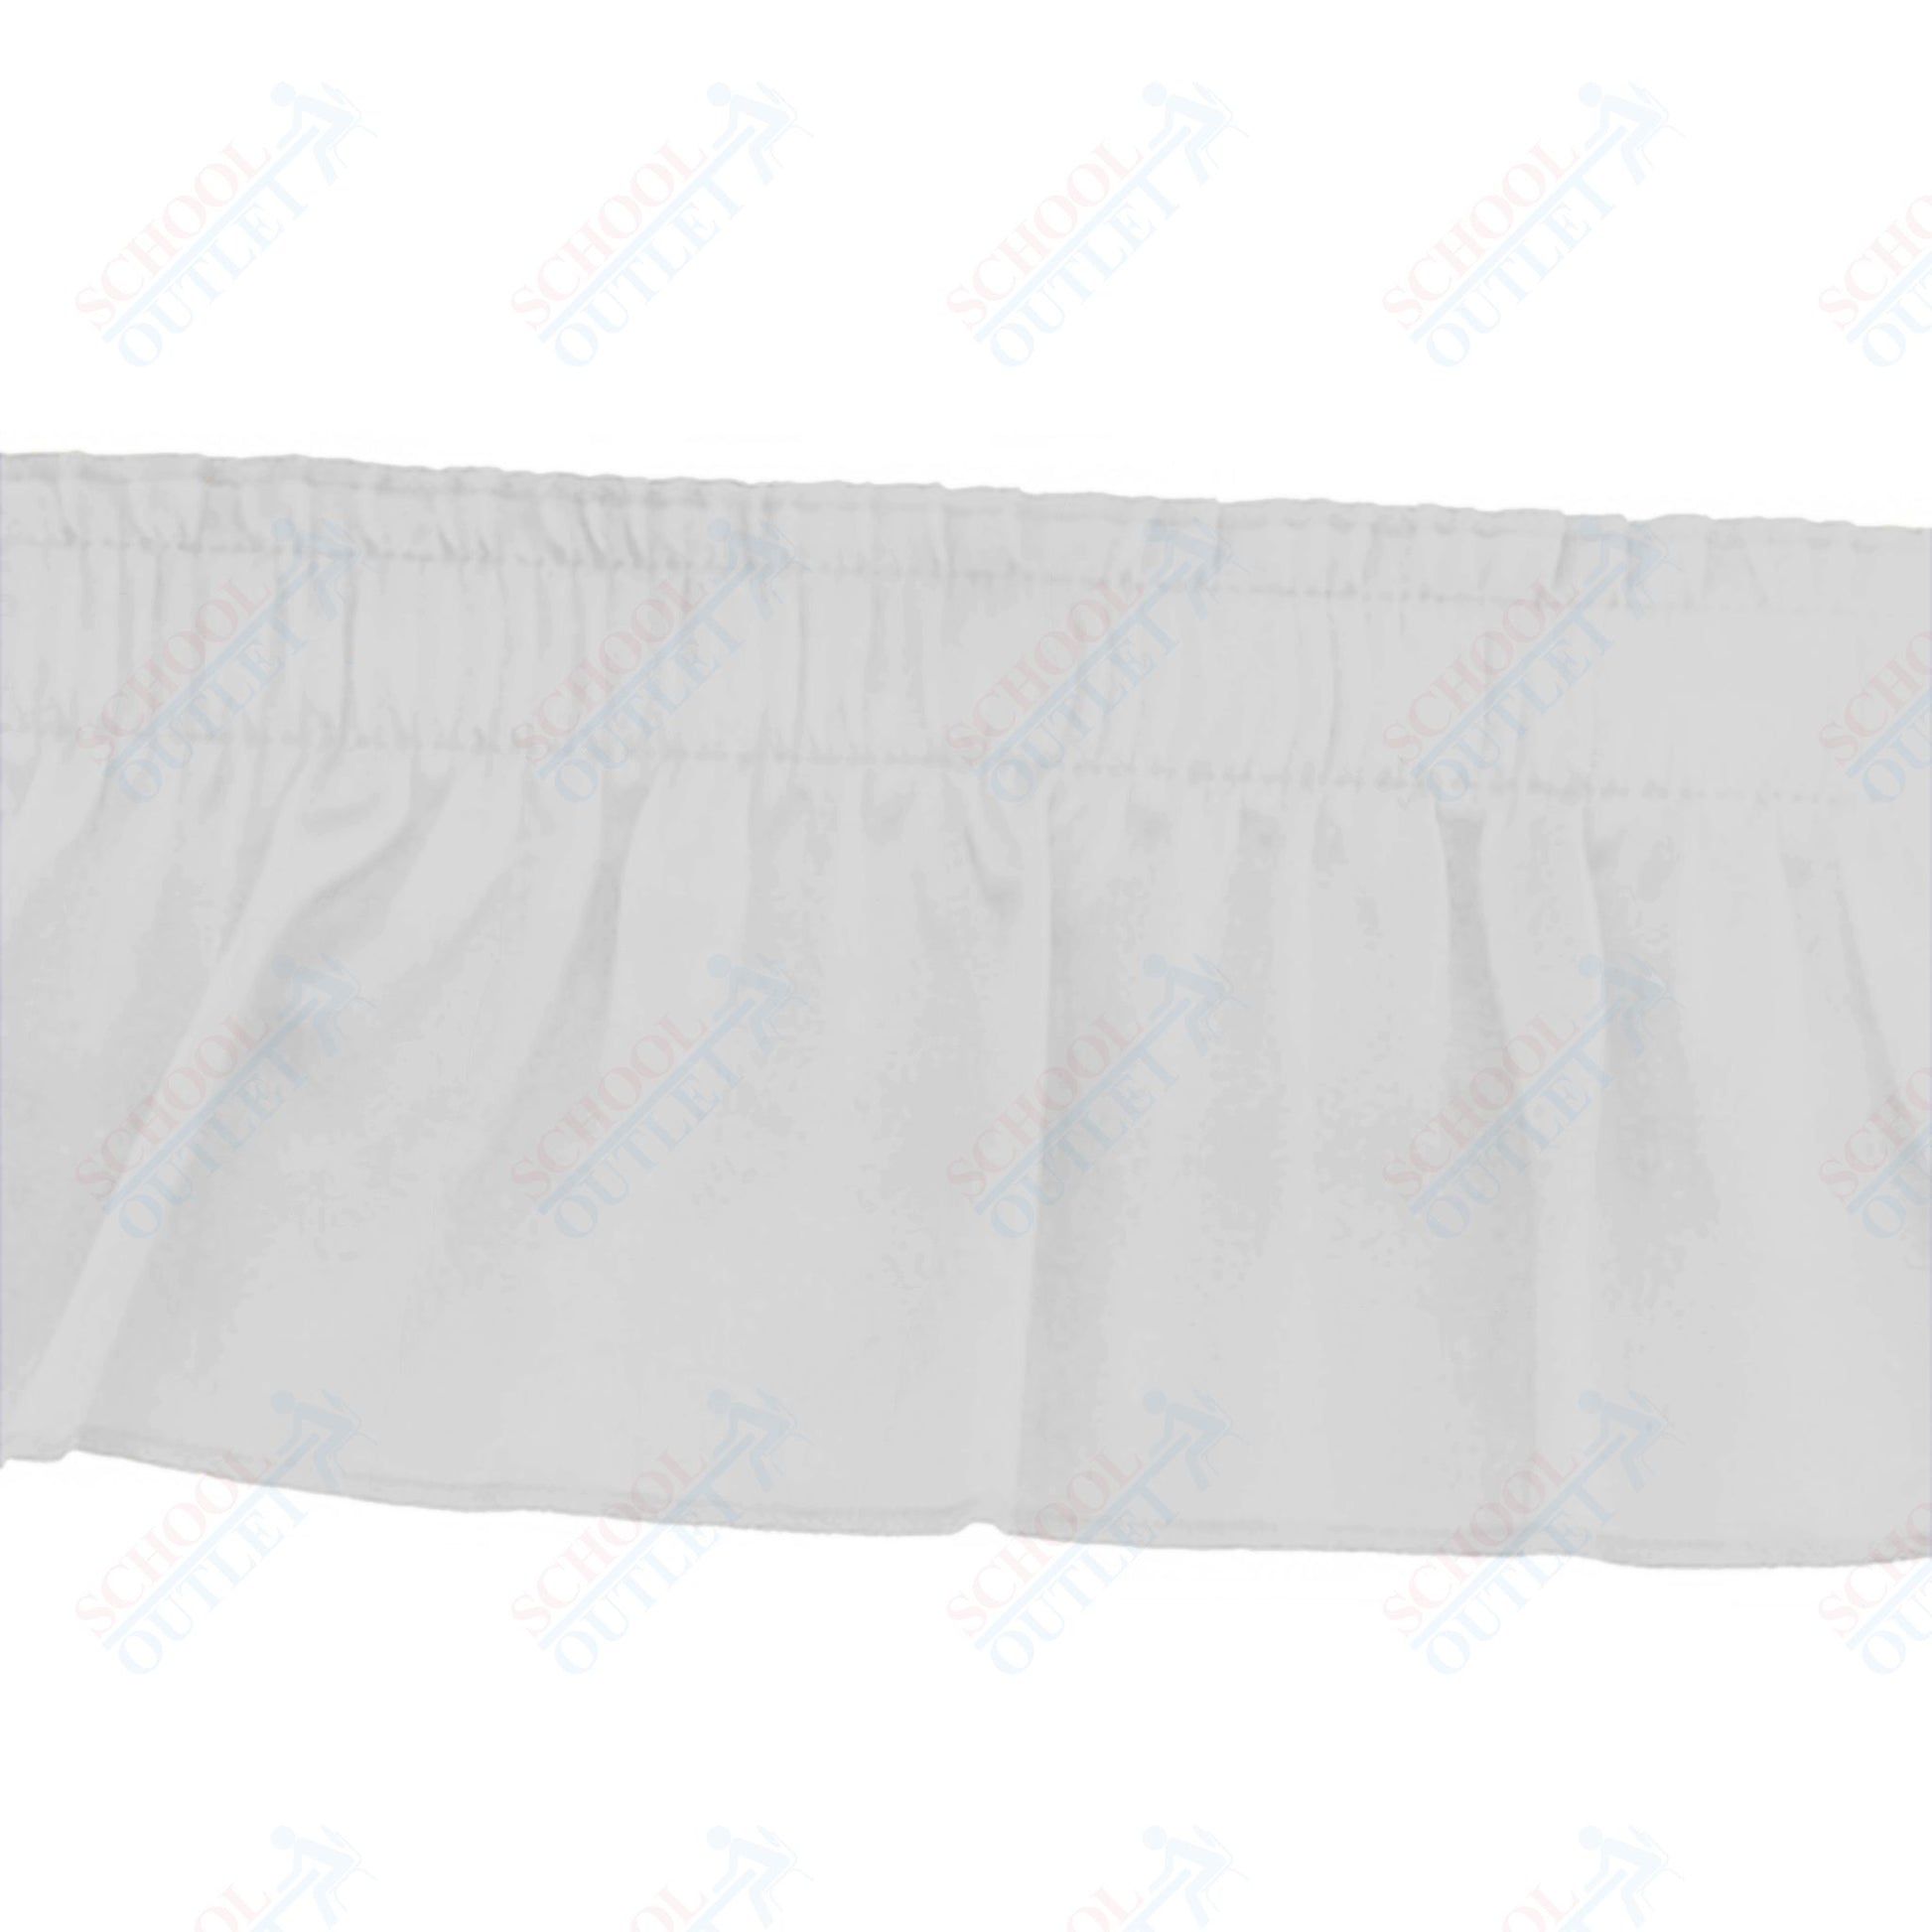 AmTab Stage and Riser Skirting - Shirred Pleat - 23" Skirting Height - Applicable for 24" Stage Height (AmTab AMT - SKRT24) - SchoolOutlet